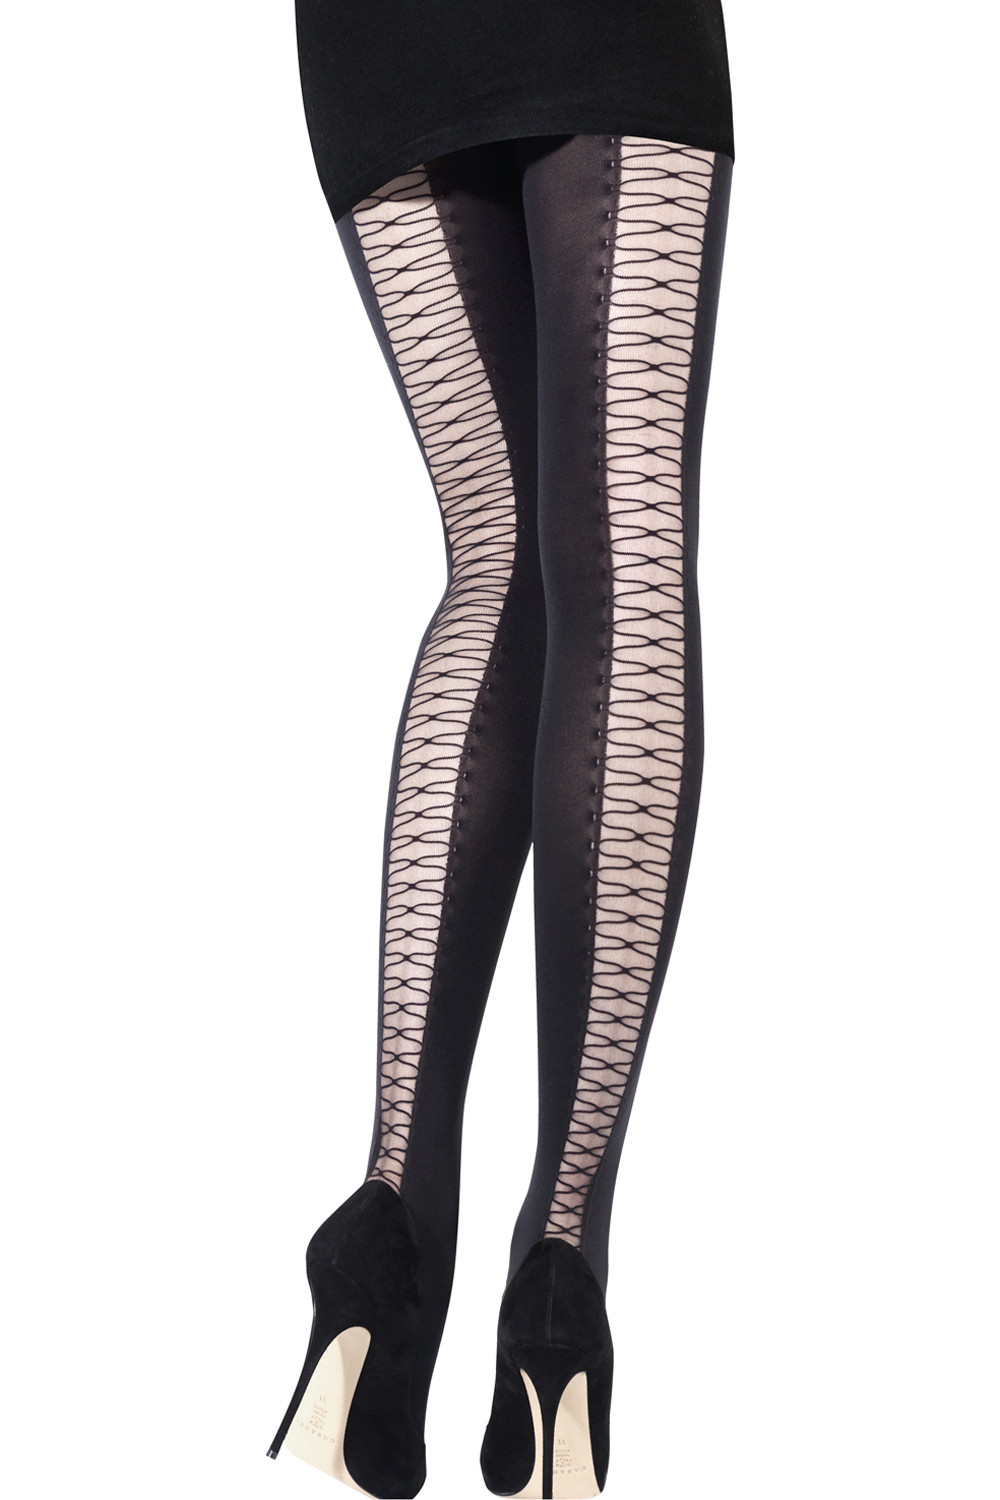 Women's Tights Patterns, Pantyhose Bow Pattern, White Tights Woman